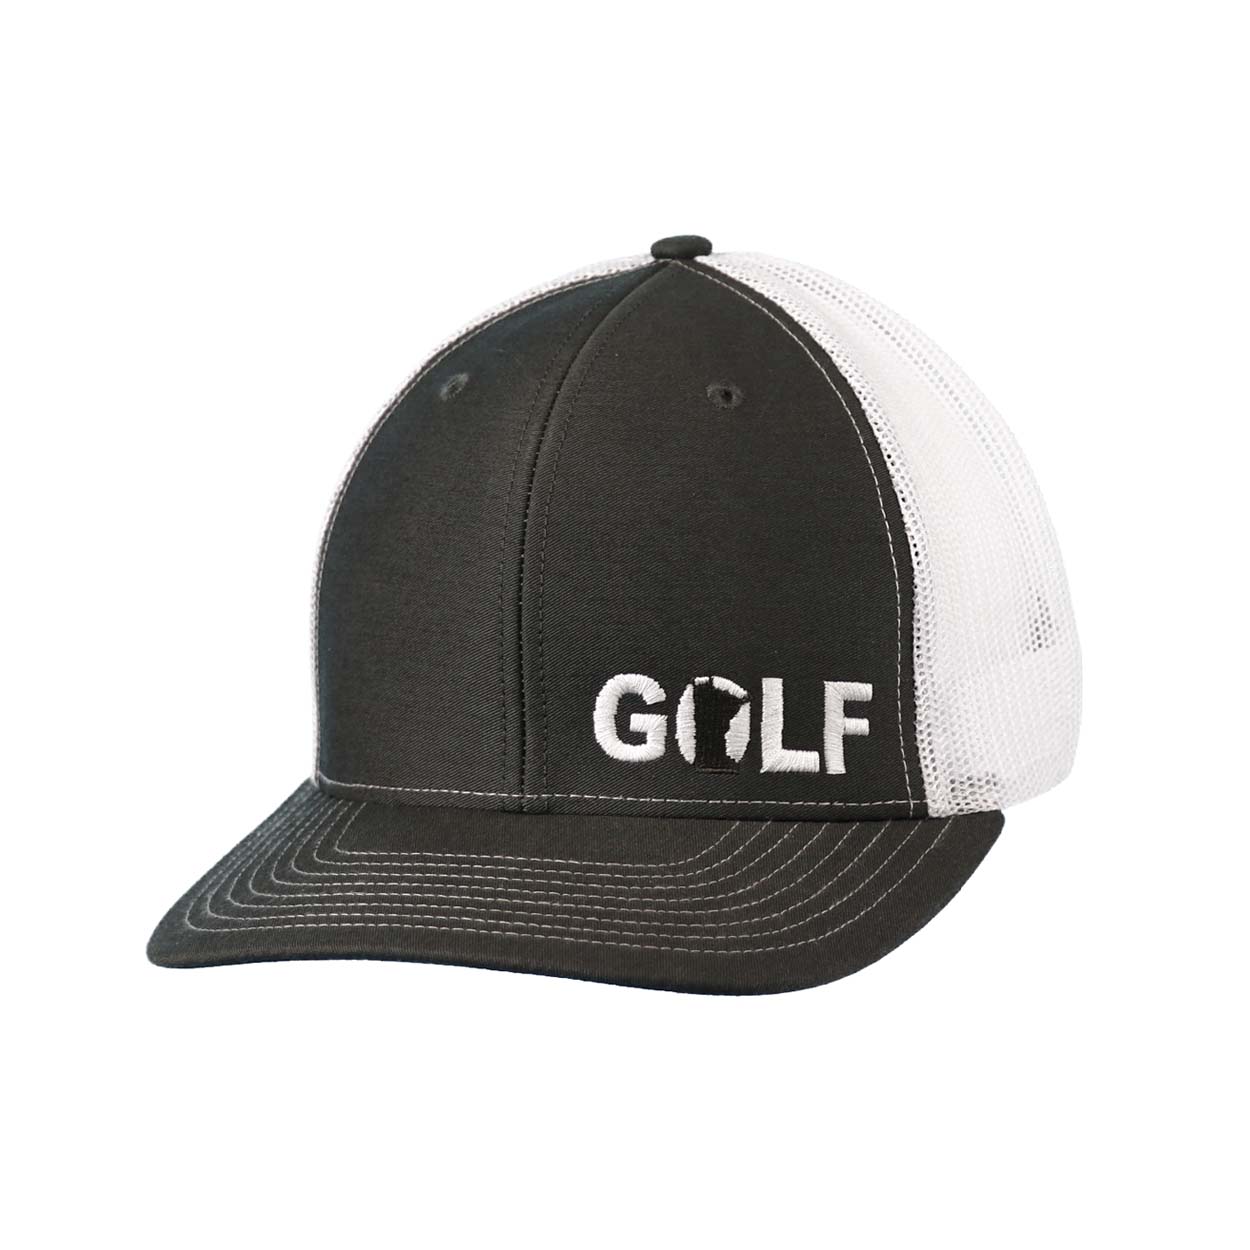 Golf Minnesota Classic Pro Night Out Embroidered Snapback Trucker Hat Gray/White